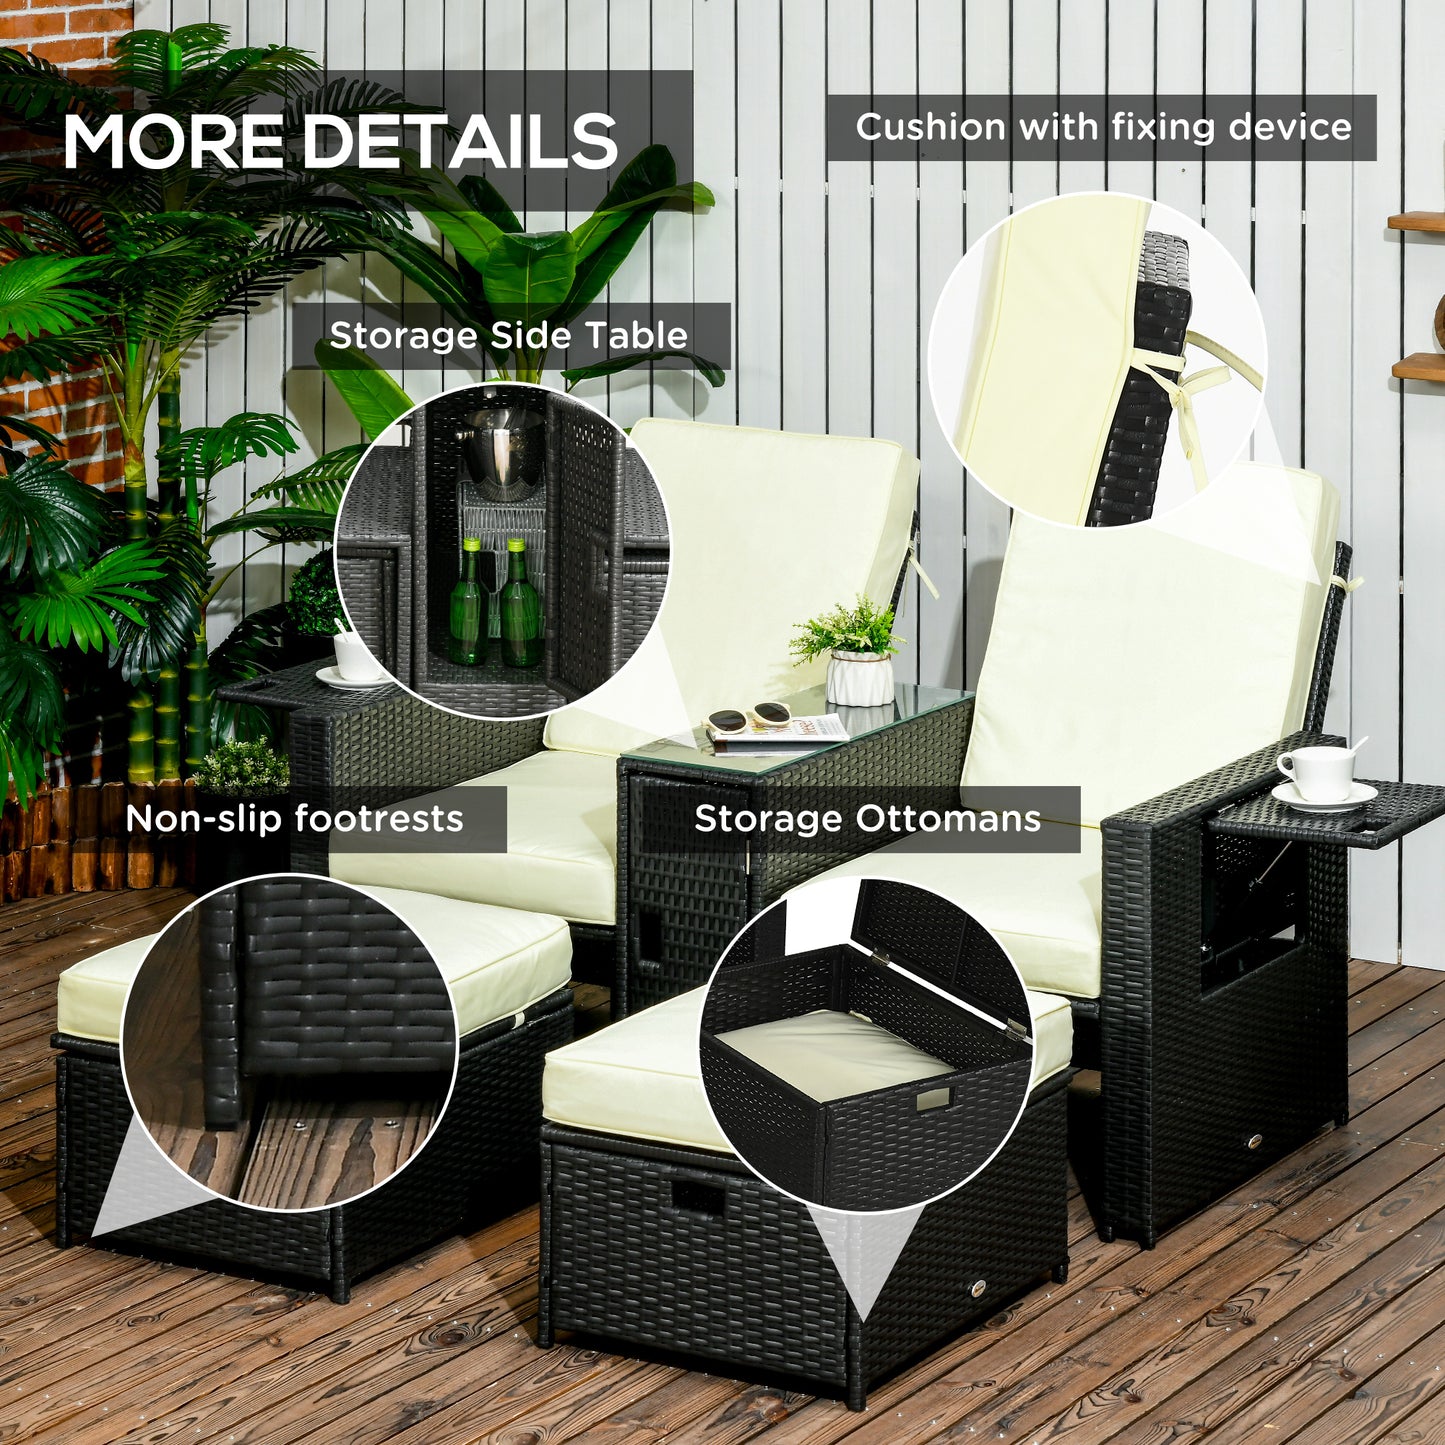 Outsunny 5PC PE Rattan Sun Lounger, Outdoor Wicker 5-level Adjustable Recliner Sofa Bed with Storage Side Table, Footstools, for Patio, Garden, Black